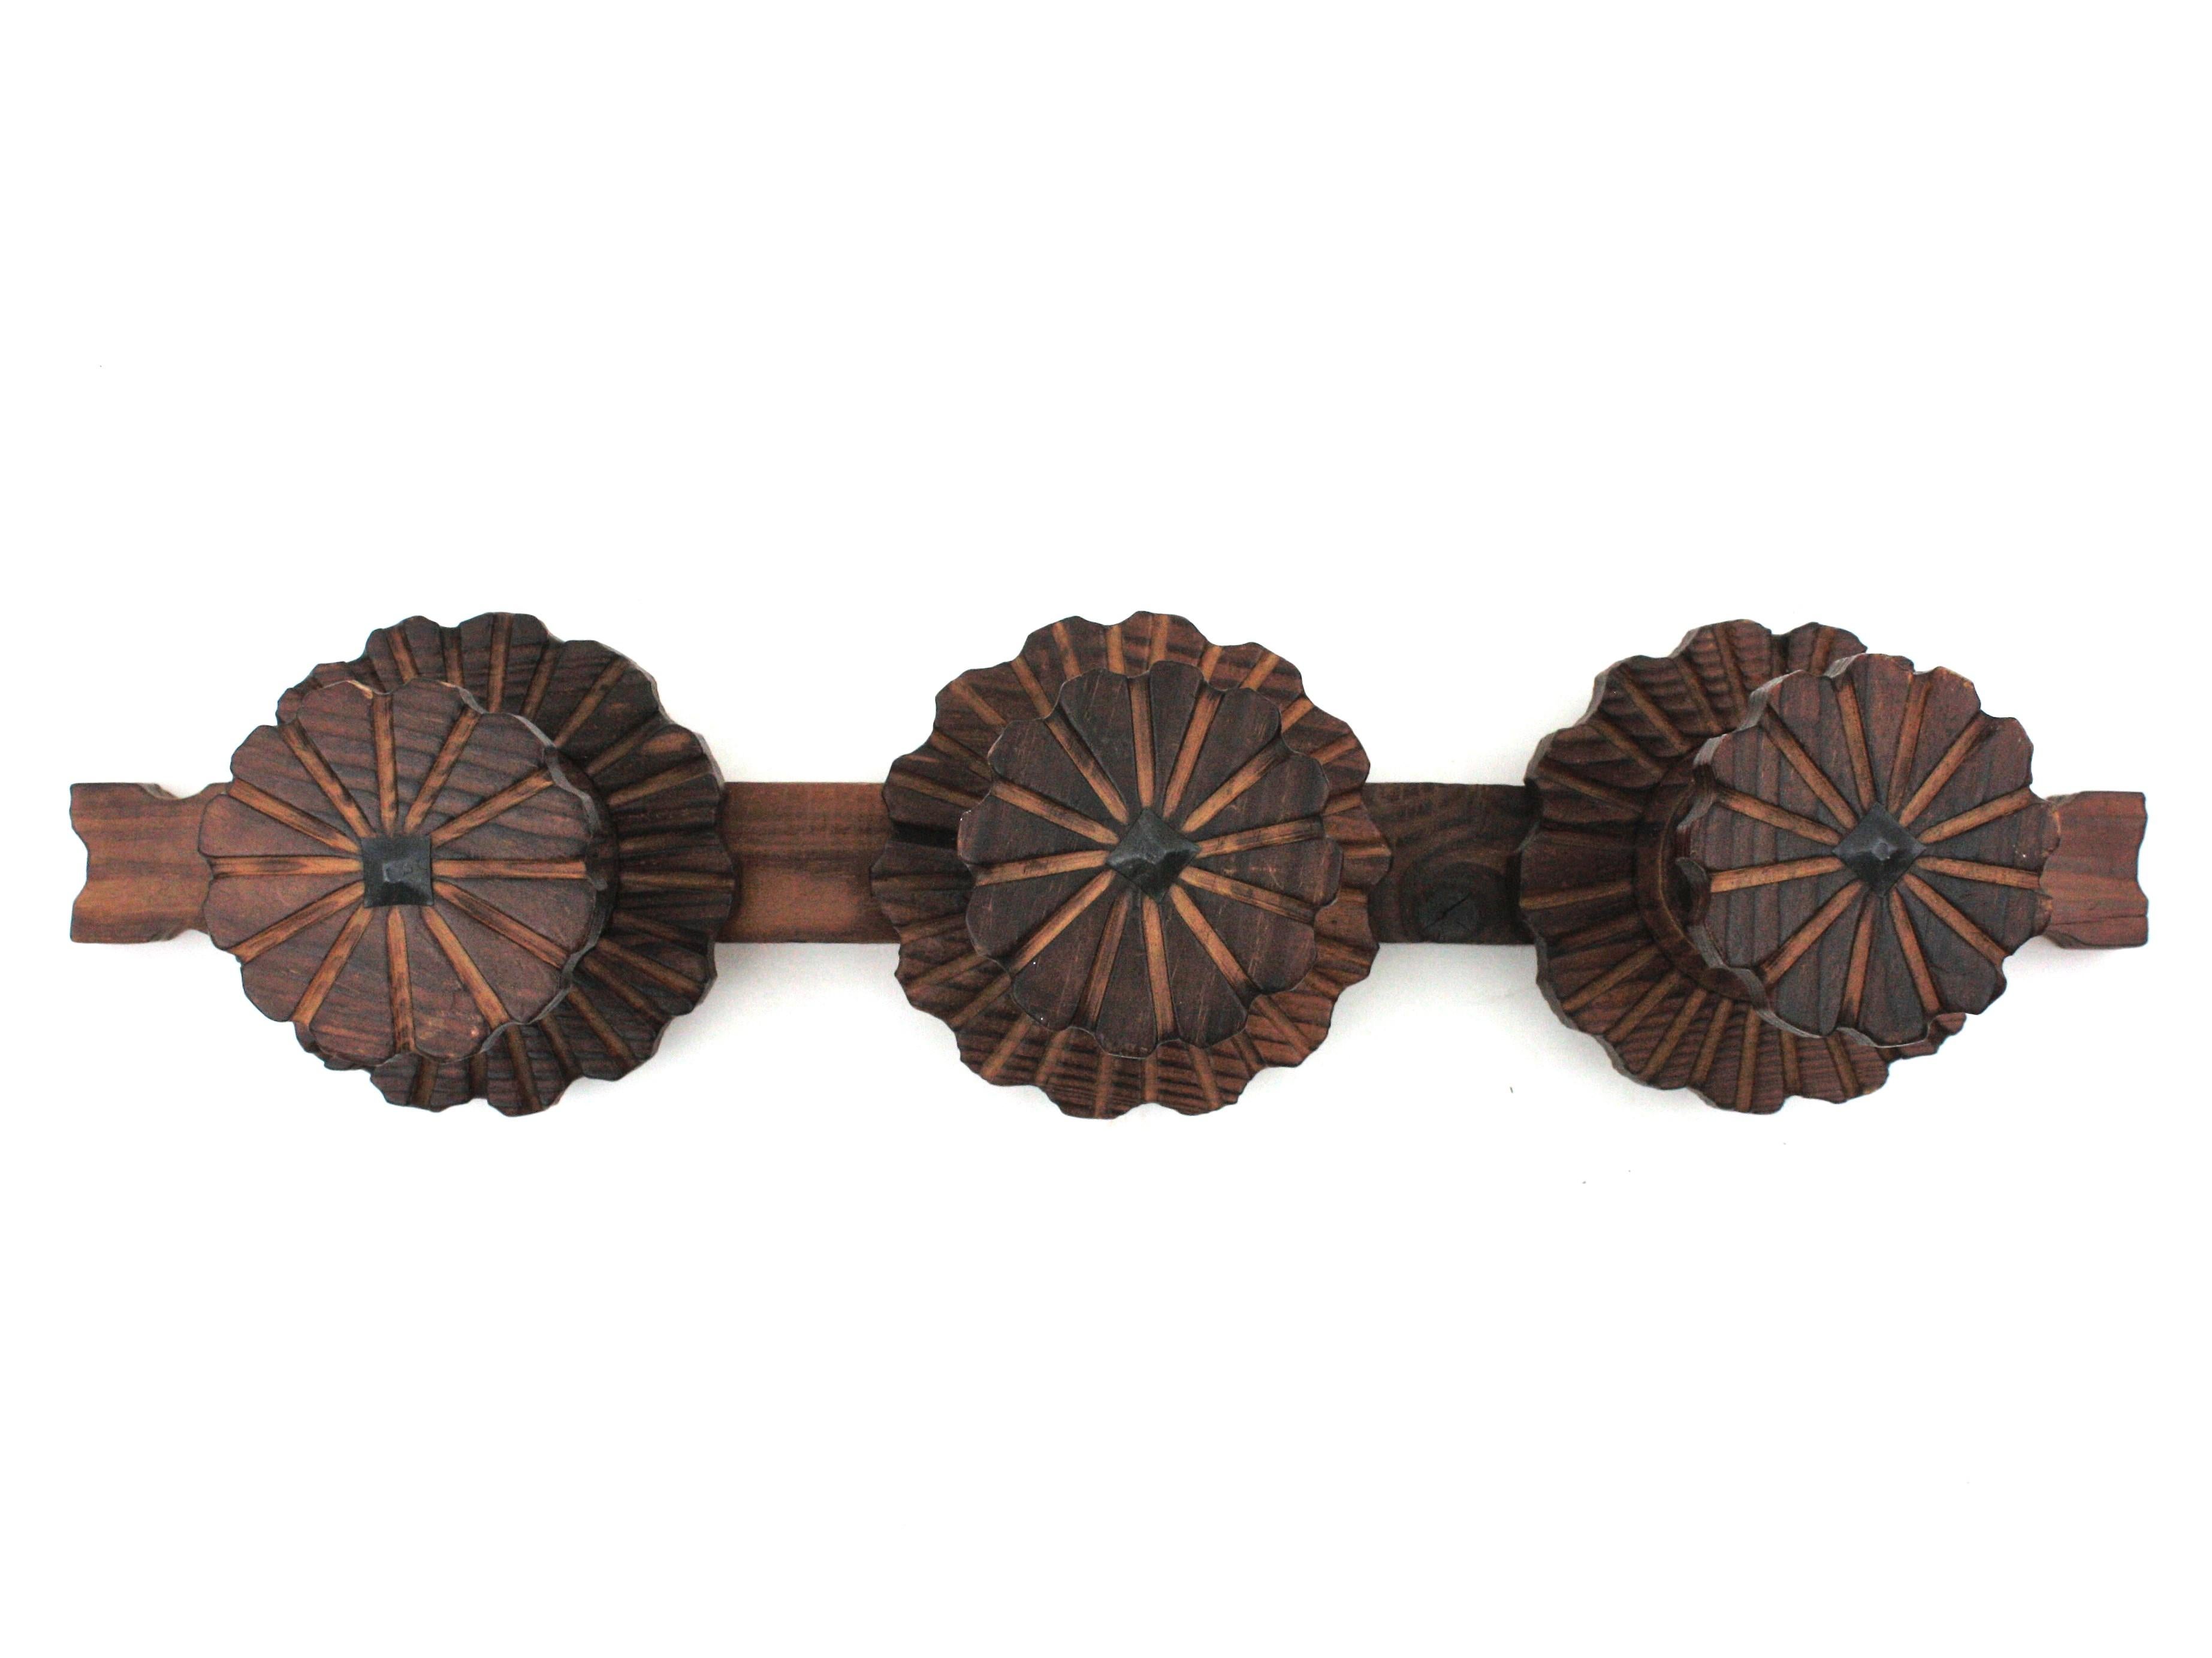 Handcarved pine wood wall coat rack, 3 hangers, Spain, 1940s.
This eye-catching coat rack has 3 flower shaped hangers with beautifully carved backplates and striped details.
It has a rustic finish and spanish colonial accents.
To be used a wall coat